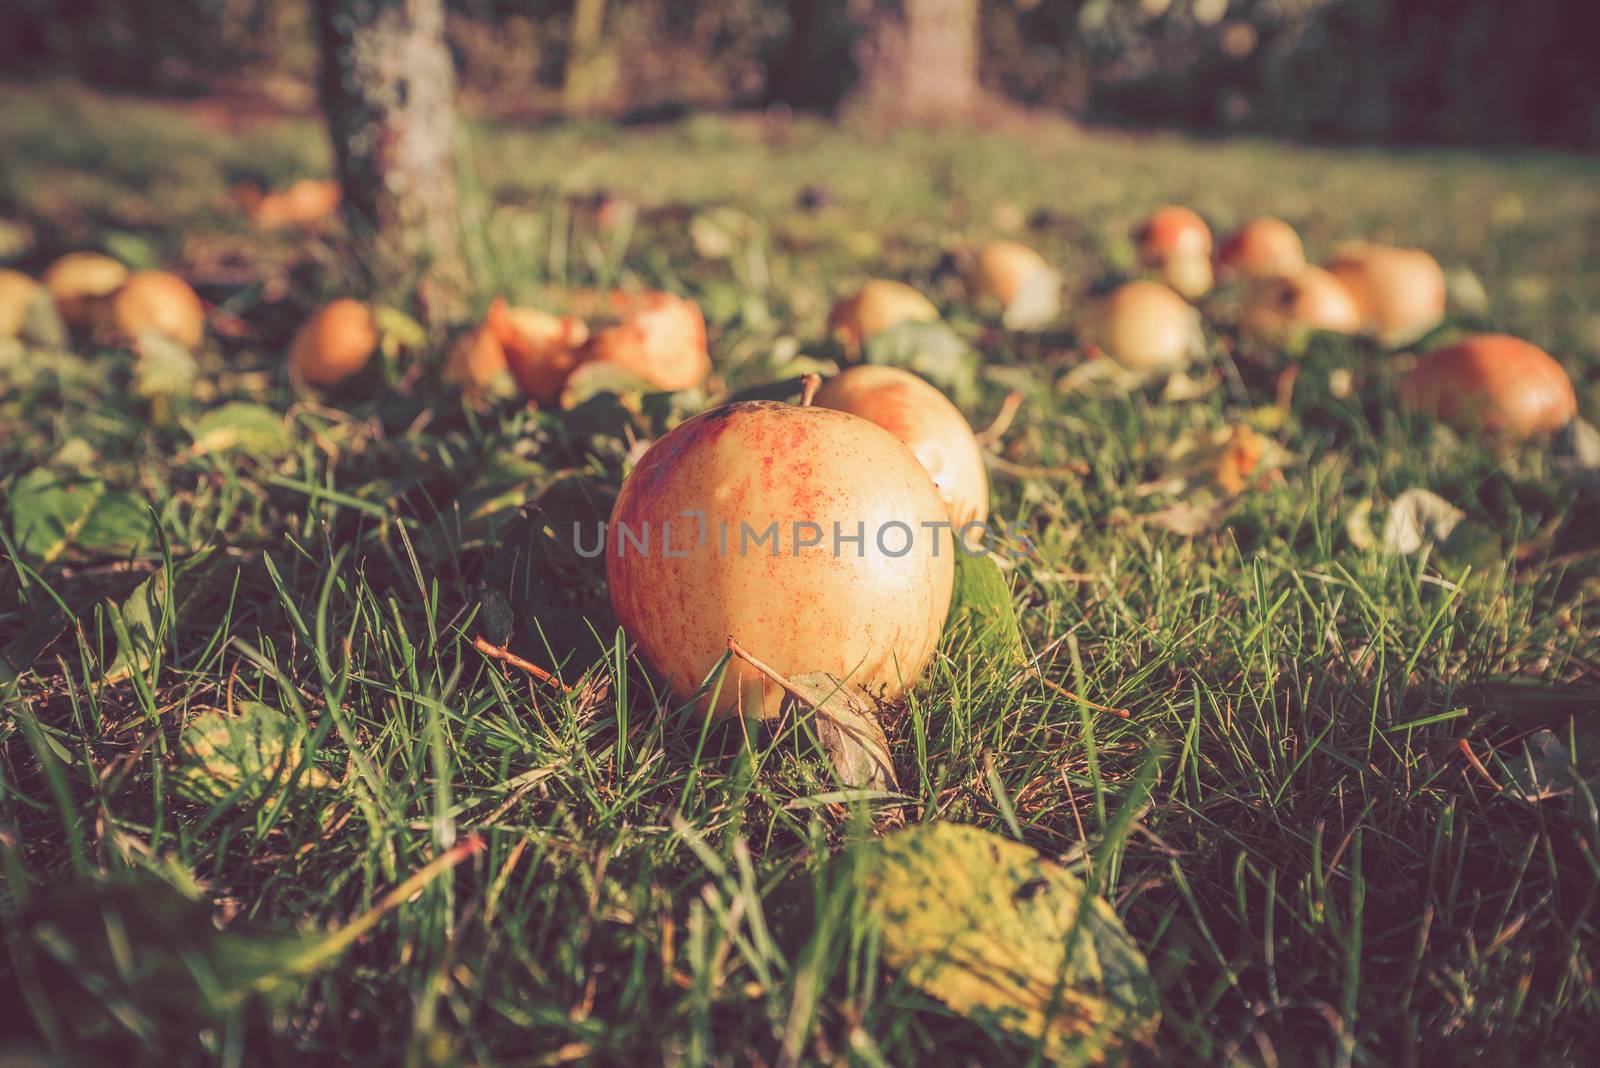 Autumn apples on the ground in autumn in a garden with fallen apples in yellow colors in the fall